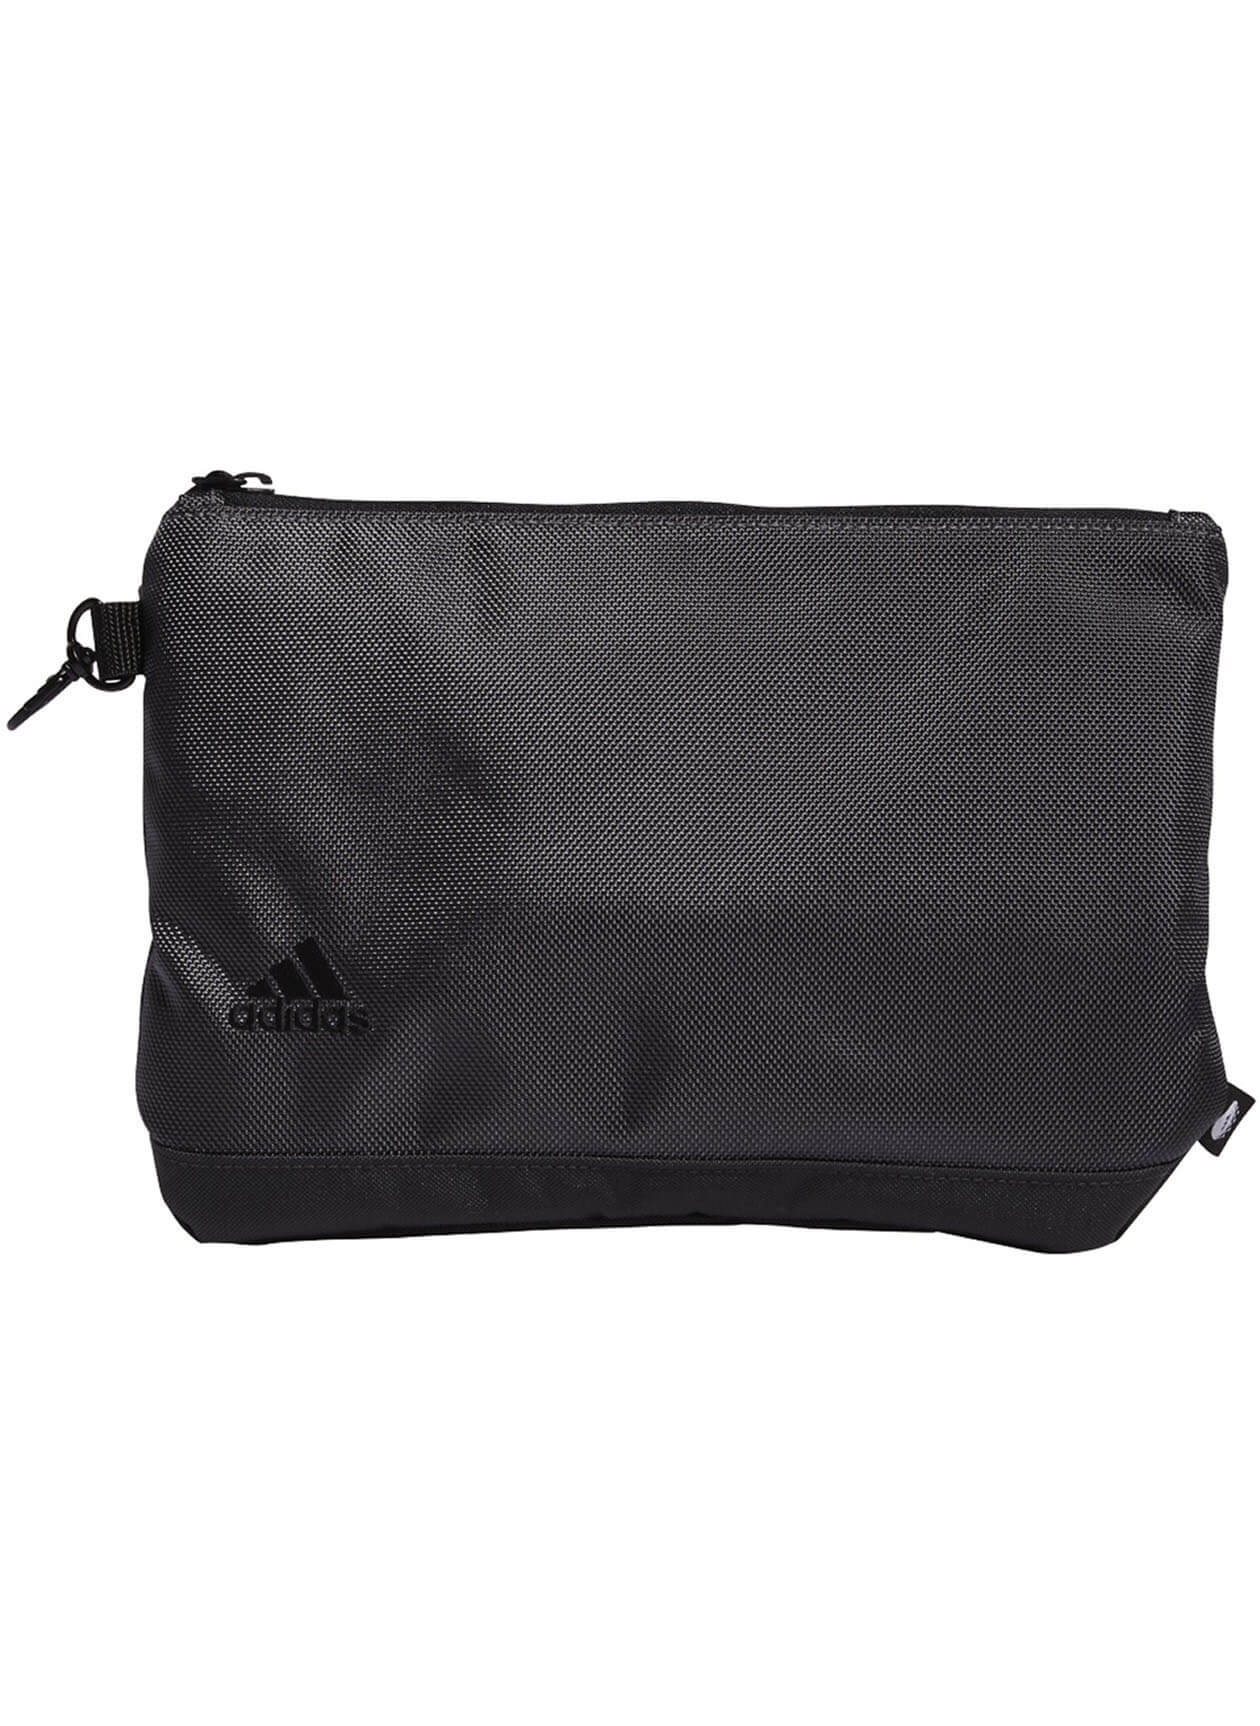 Adidas AD307 - Golf Valuables Pouch